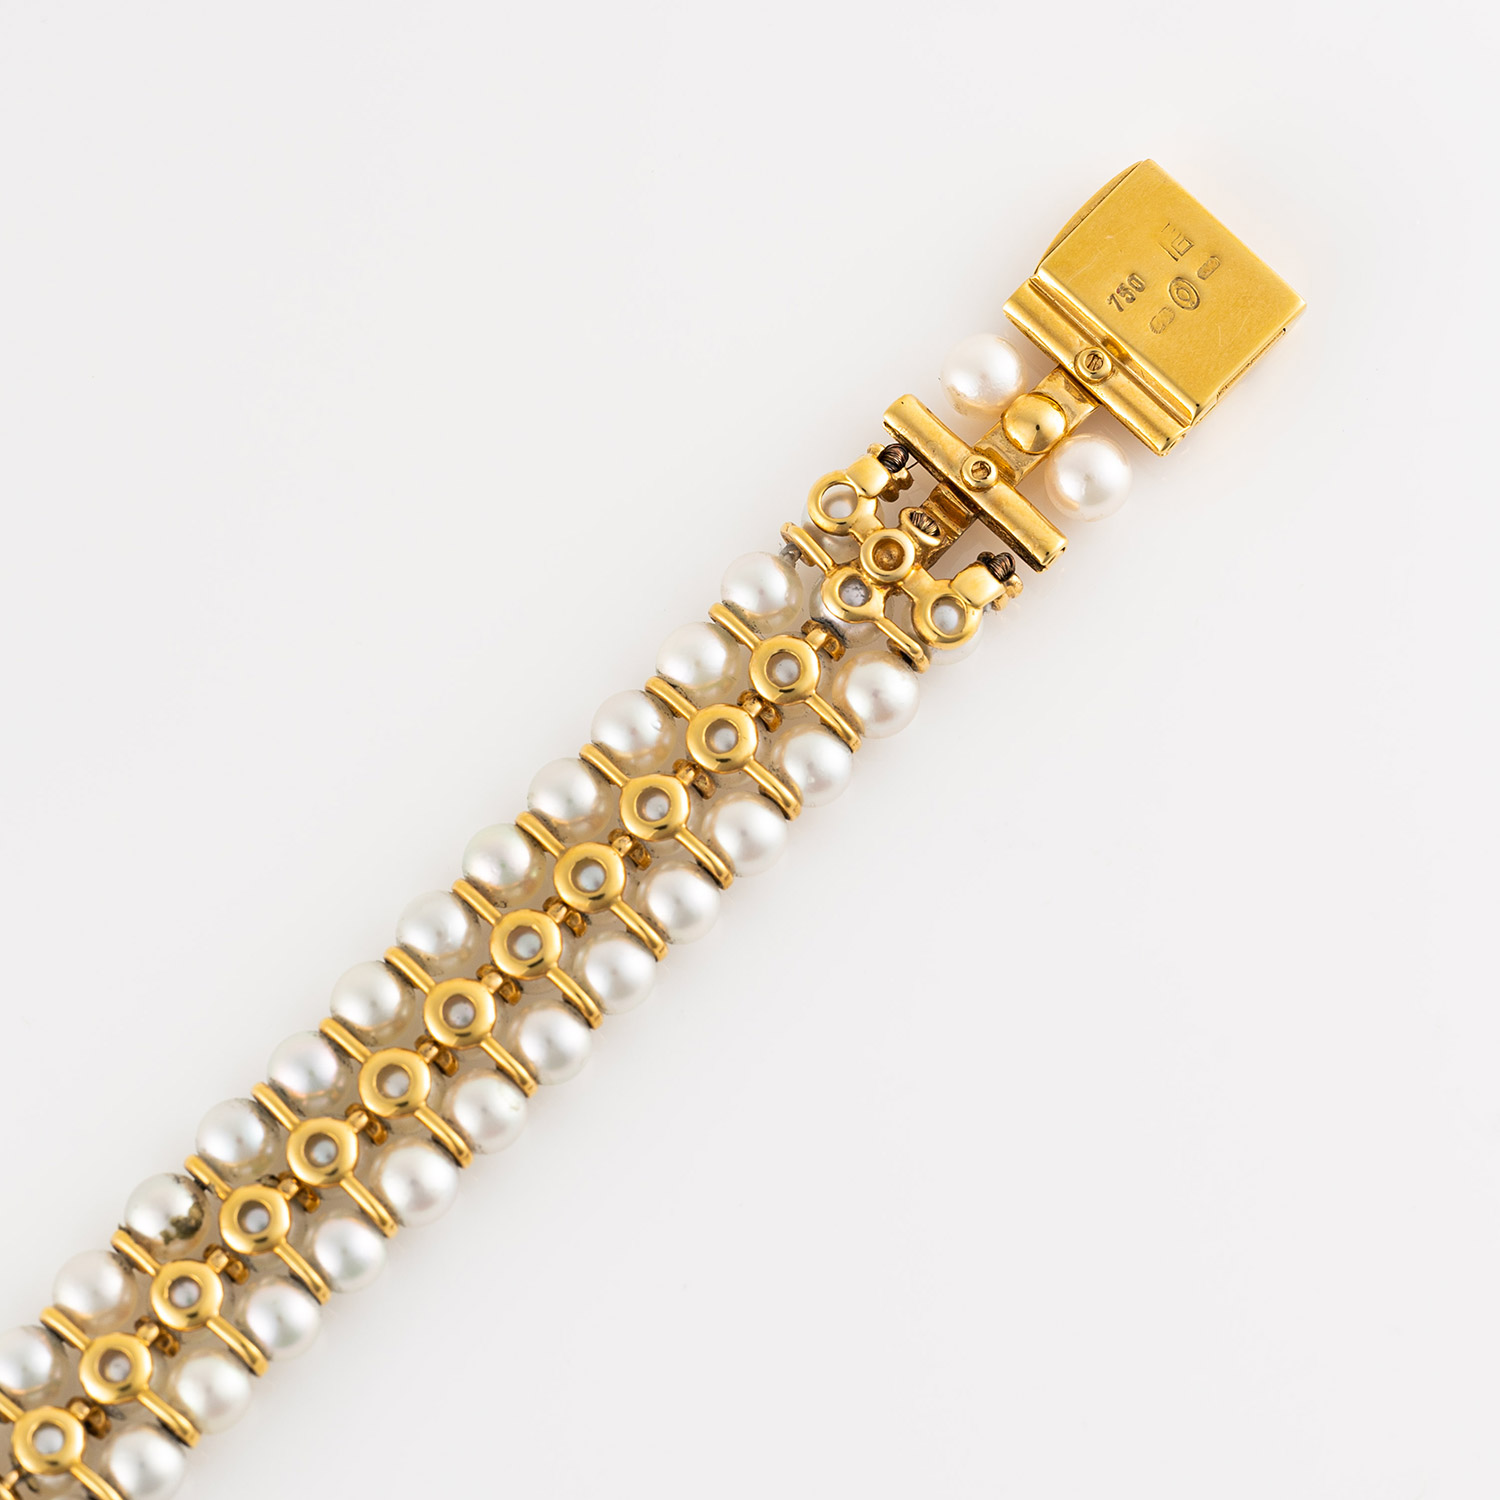 A LADIES 18K SOLID GOLD & PEARL CARTIER COLISEE BRACELET WATCH CIRCA 1990s, REF. 1989 1 Movement: - Image 6 of 9